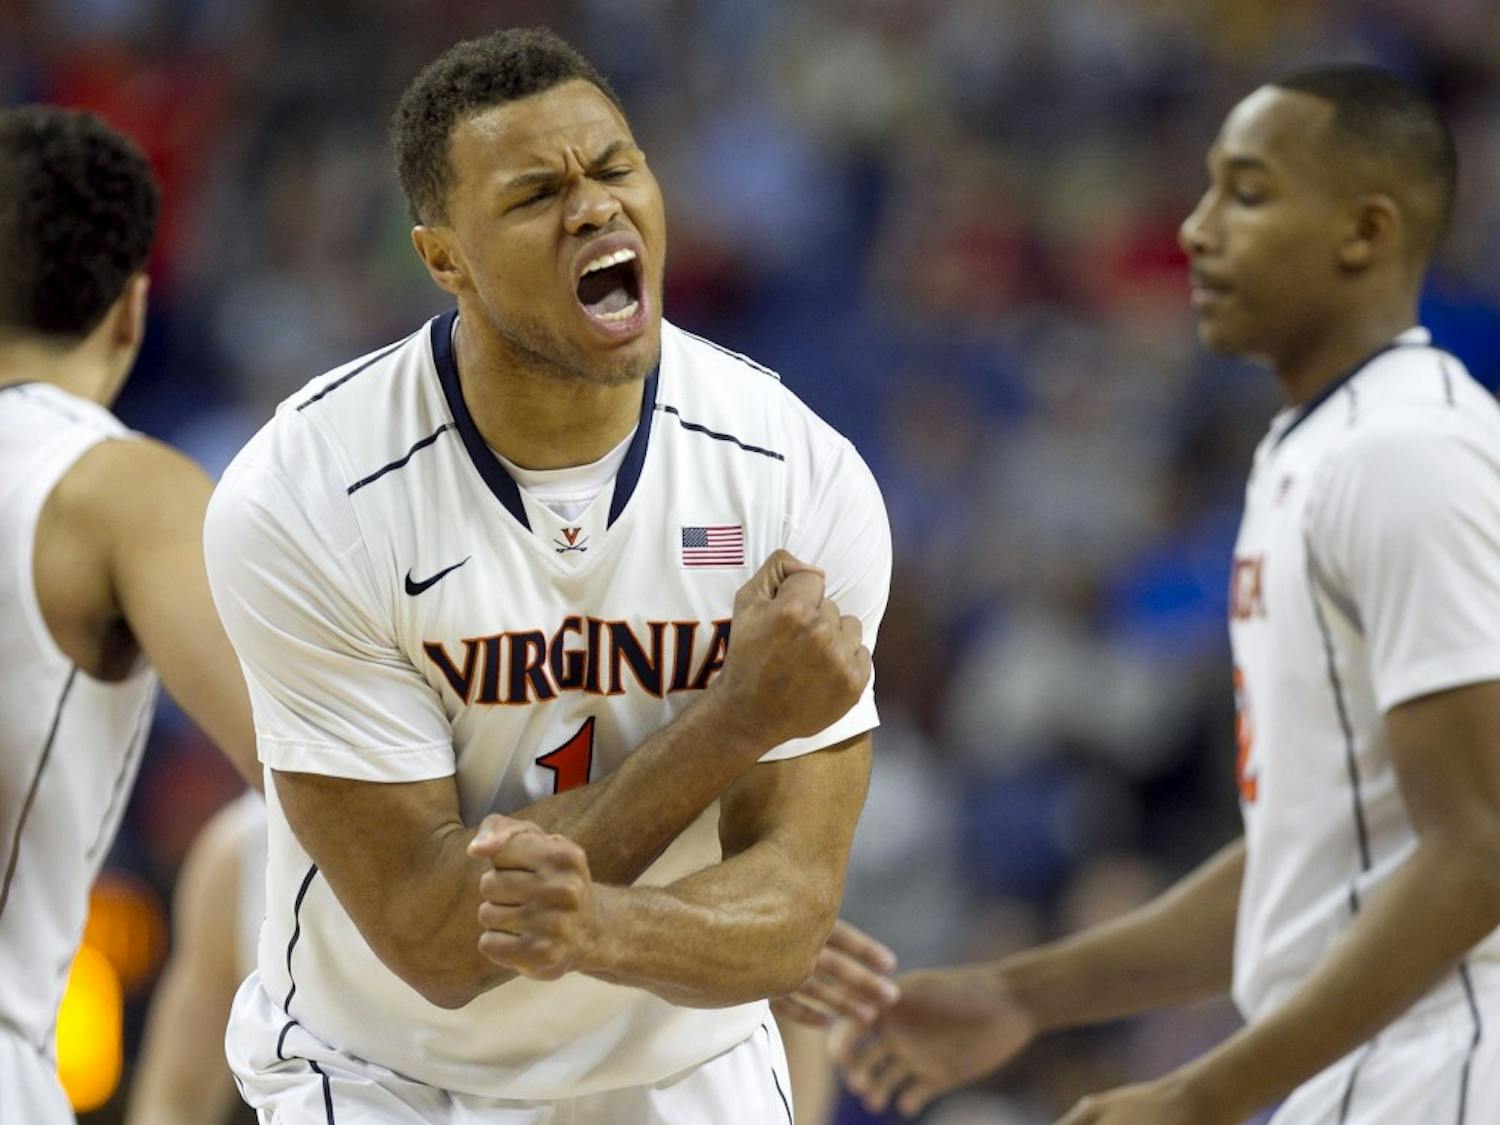 Virginia's Justin Anderson (1) reacts after the Cavaliers secured a three point lead over Pittsburgh in second half of a semifinal at the ACC Tournament in Greensboro, N.C., Saturday, March 15, 2014. Virginia defeated Pitt, 51-48. (Robert Willett/Raleigh News & Observer/MCT)